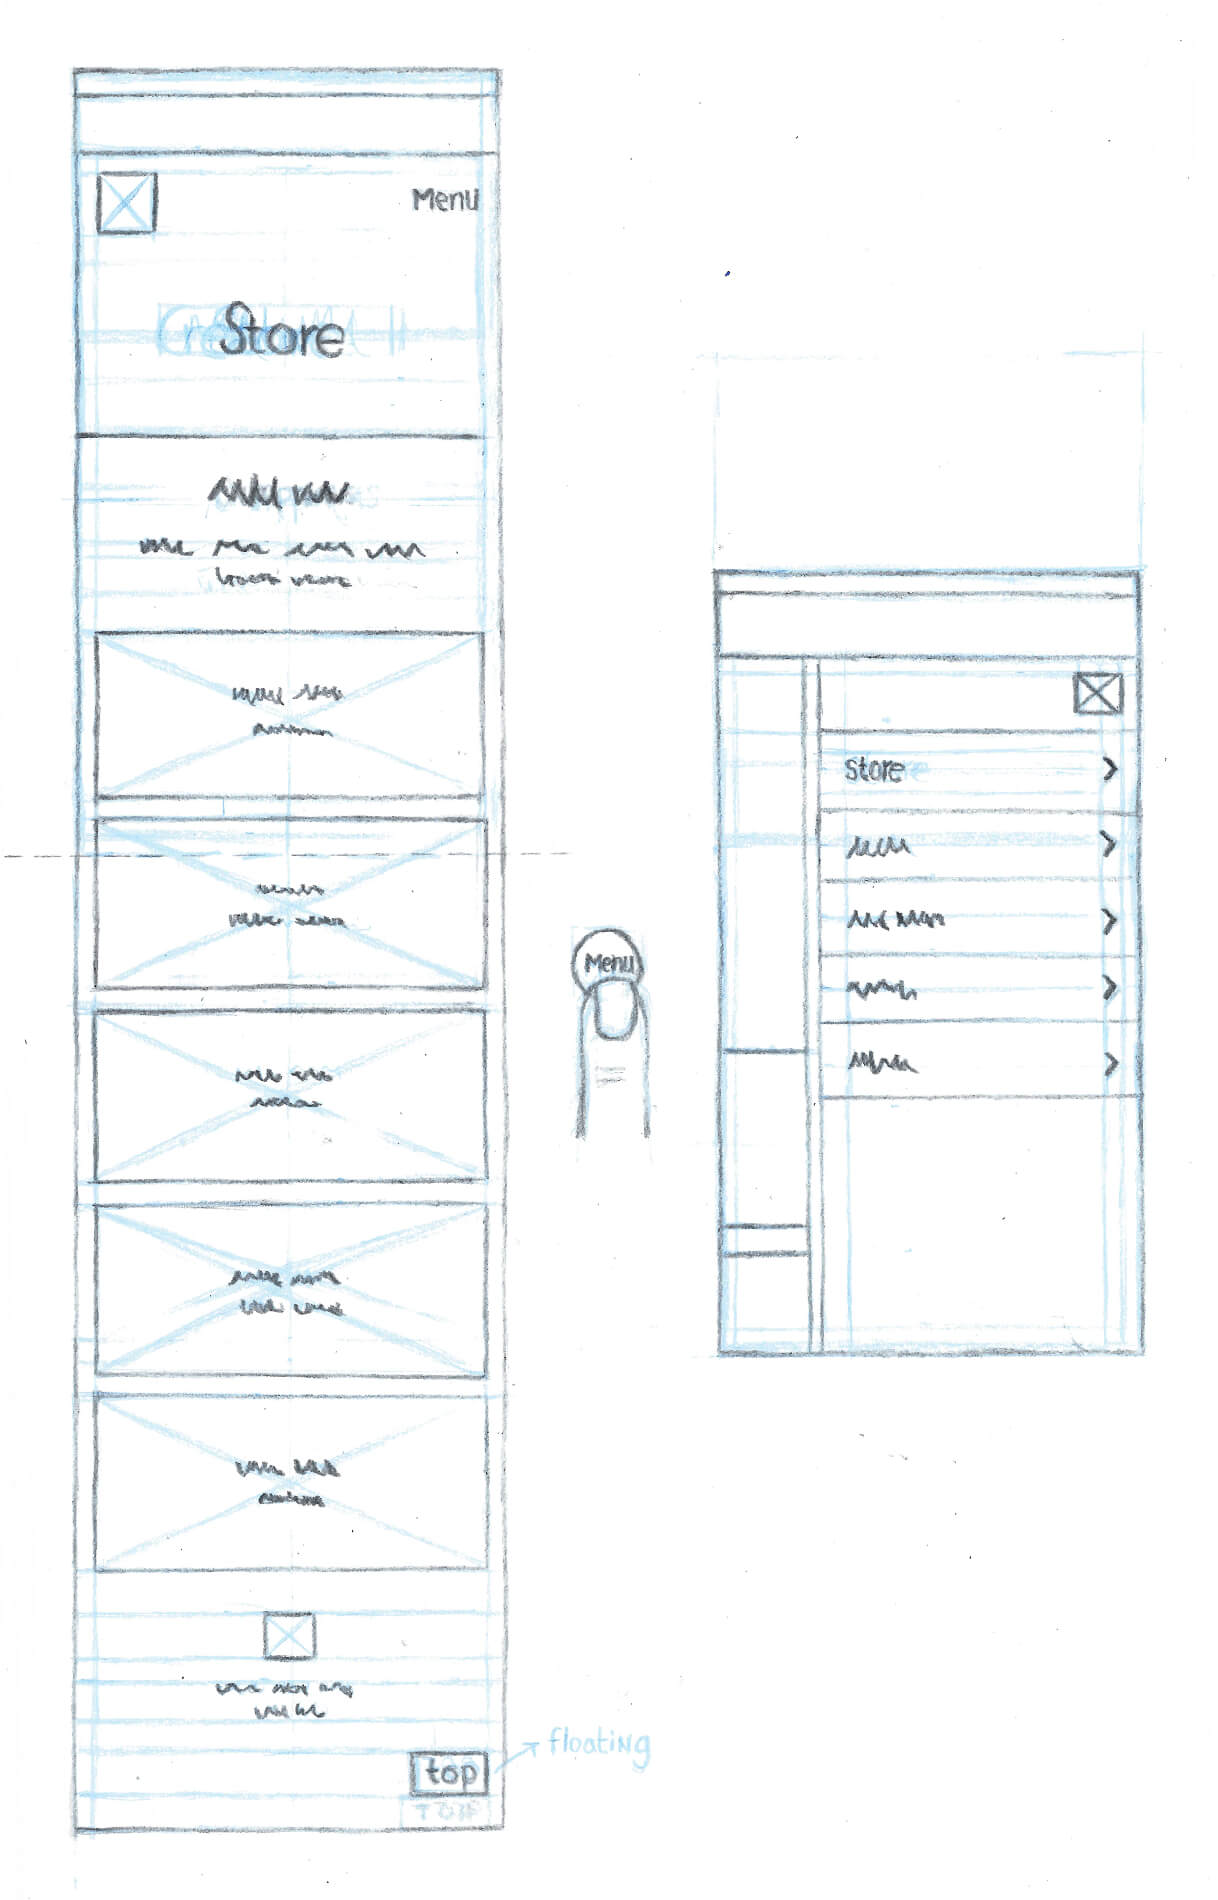 A sketch of the 'store' page's final design on mobile